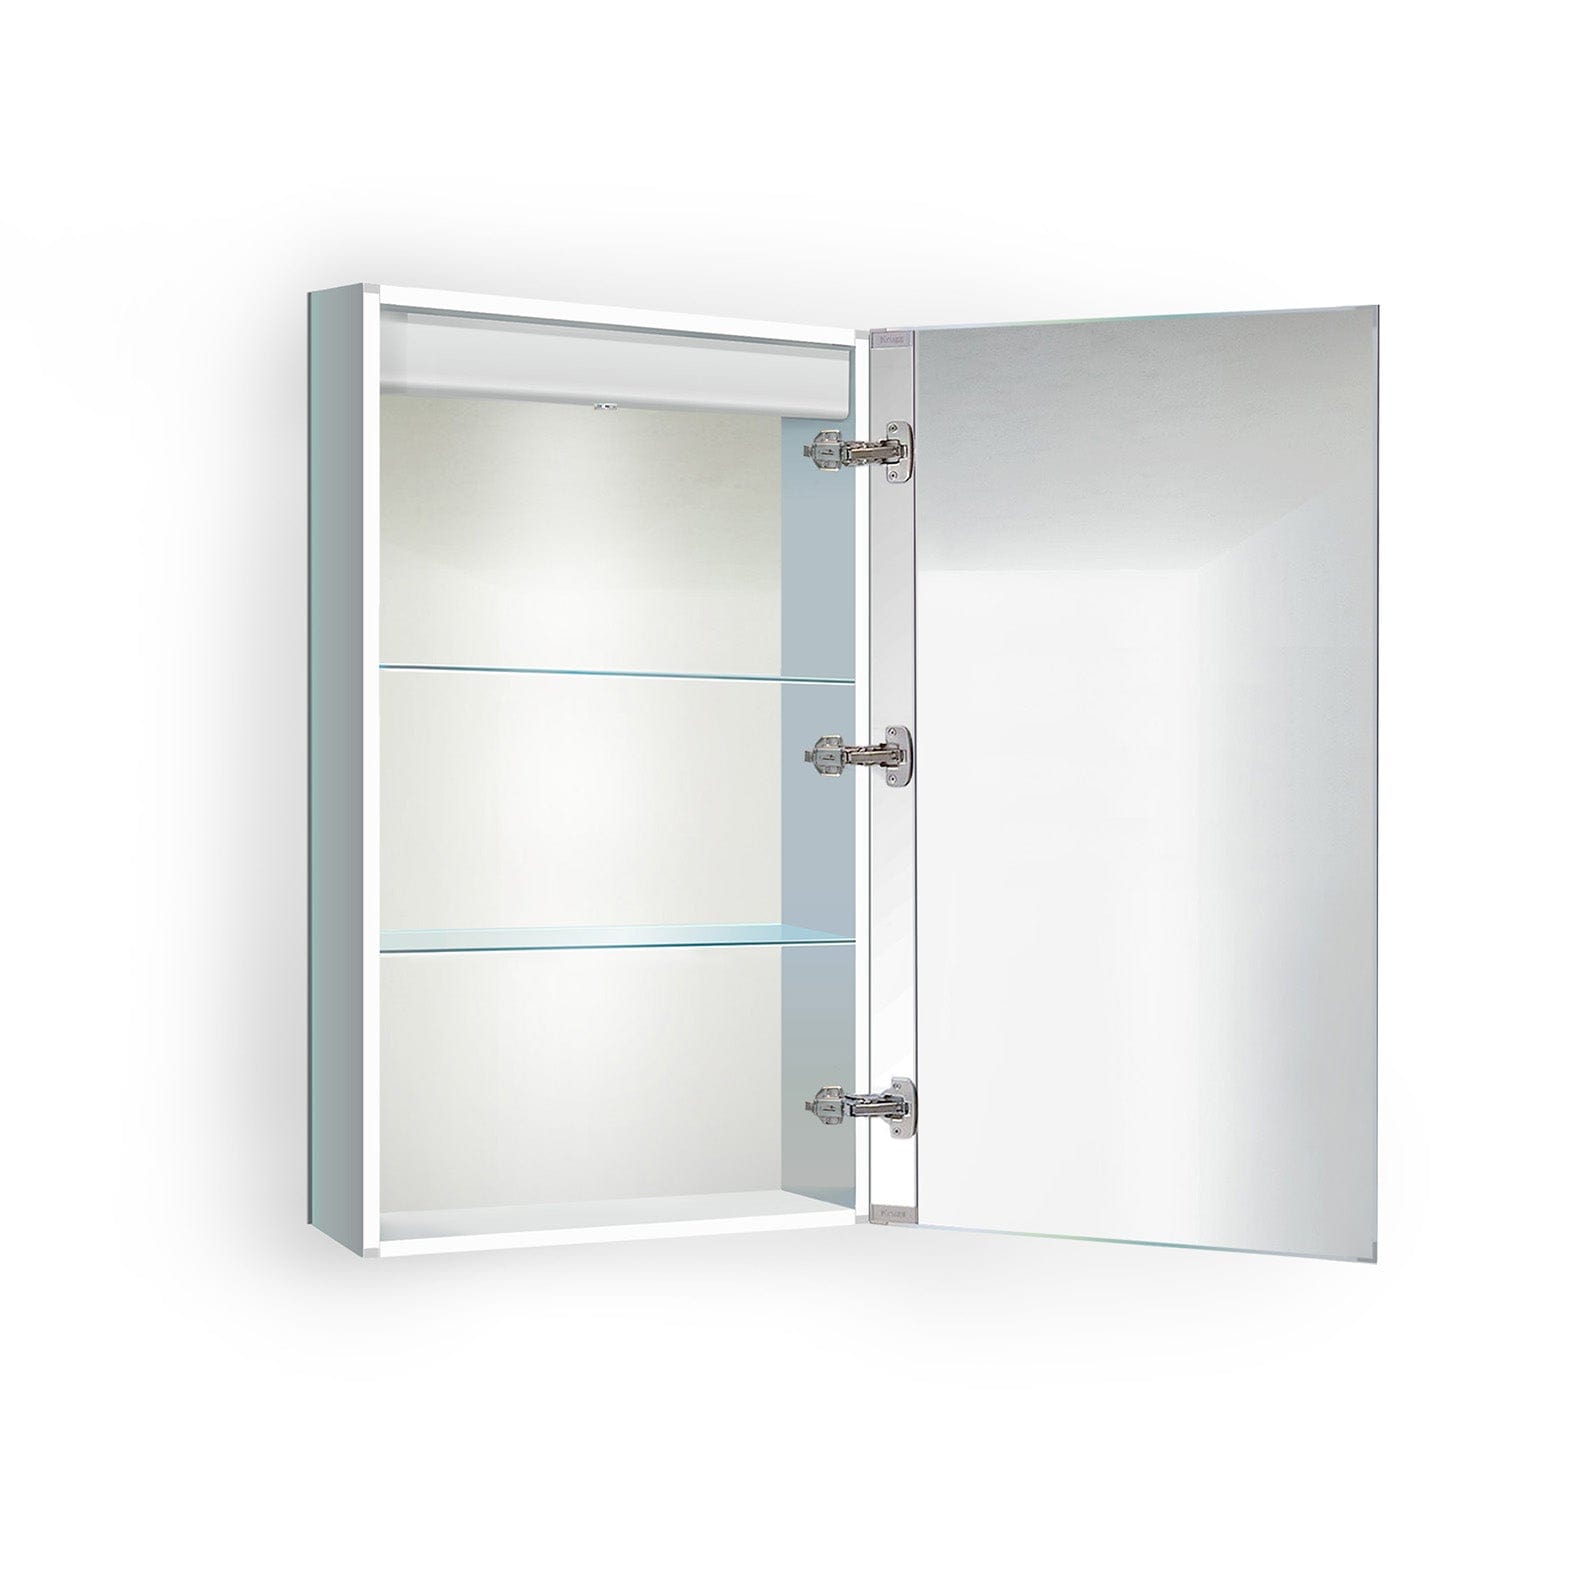 KINETIC 20" x 30" Right Cabinet - Molaix - Molaix850003475899Lighted Medicine Cabinet,RectangleKINETIC2030R